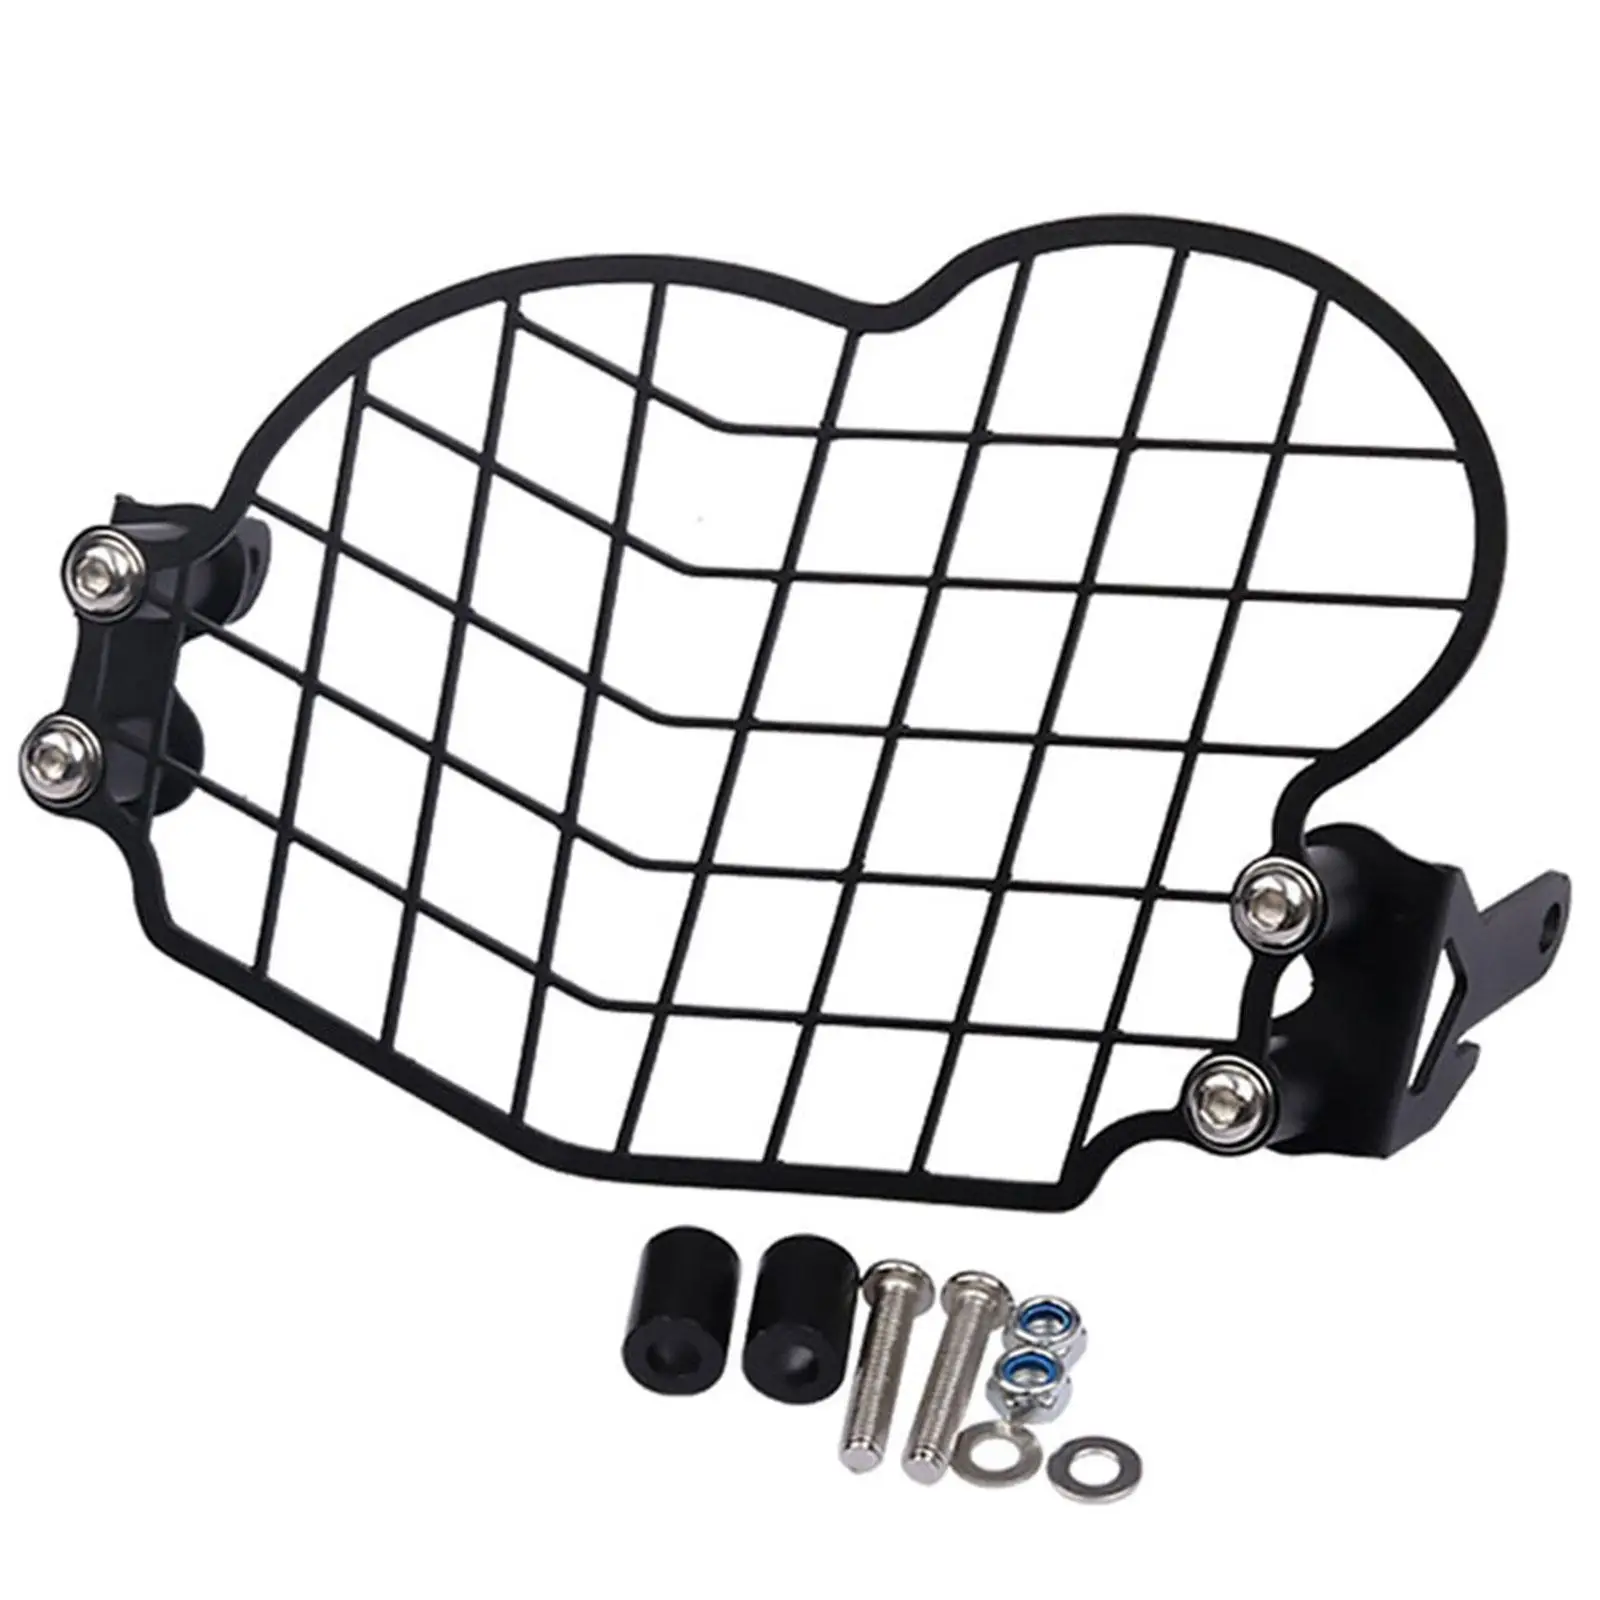 Headlight Guard Protector Premium Headlamp Grille Cover for BMW G650GS